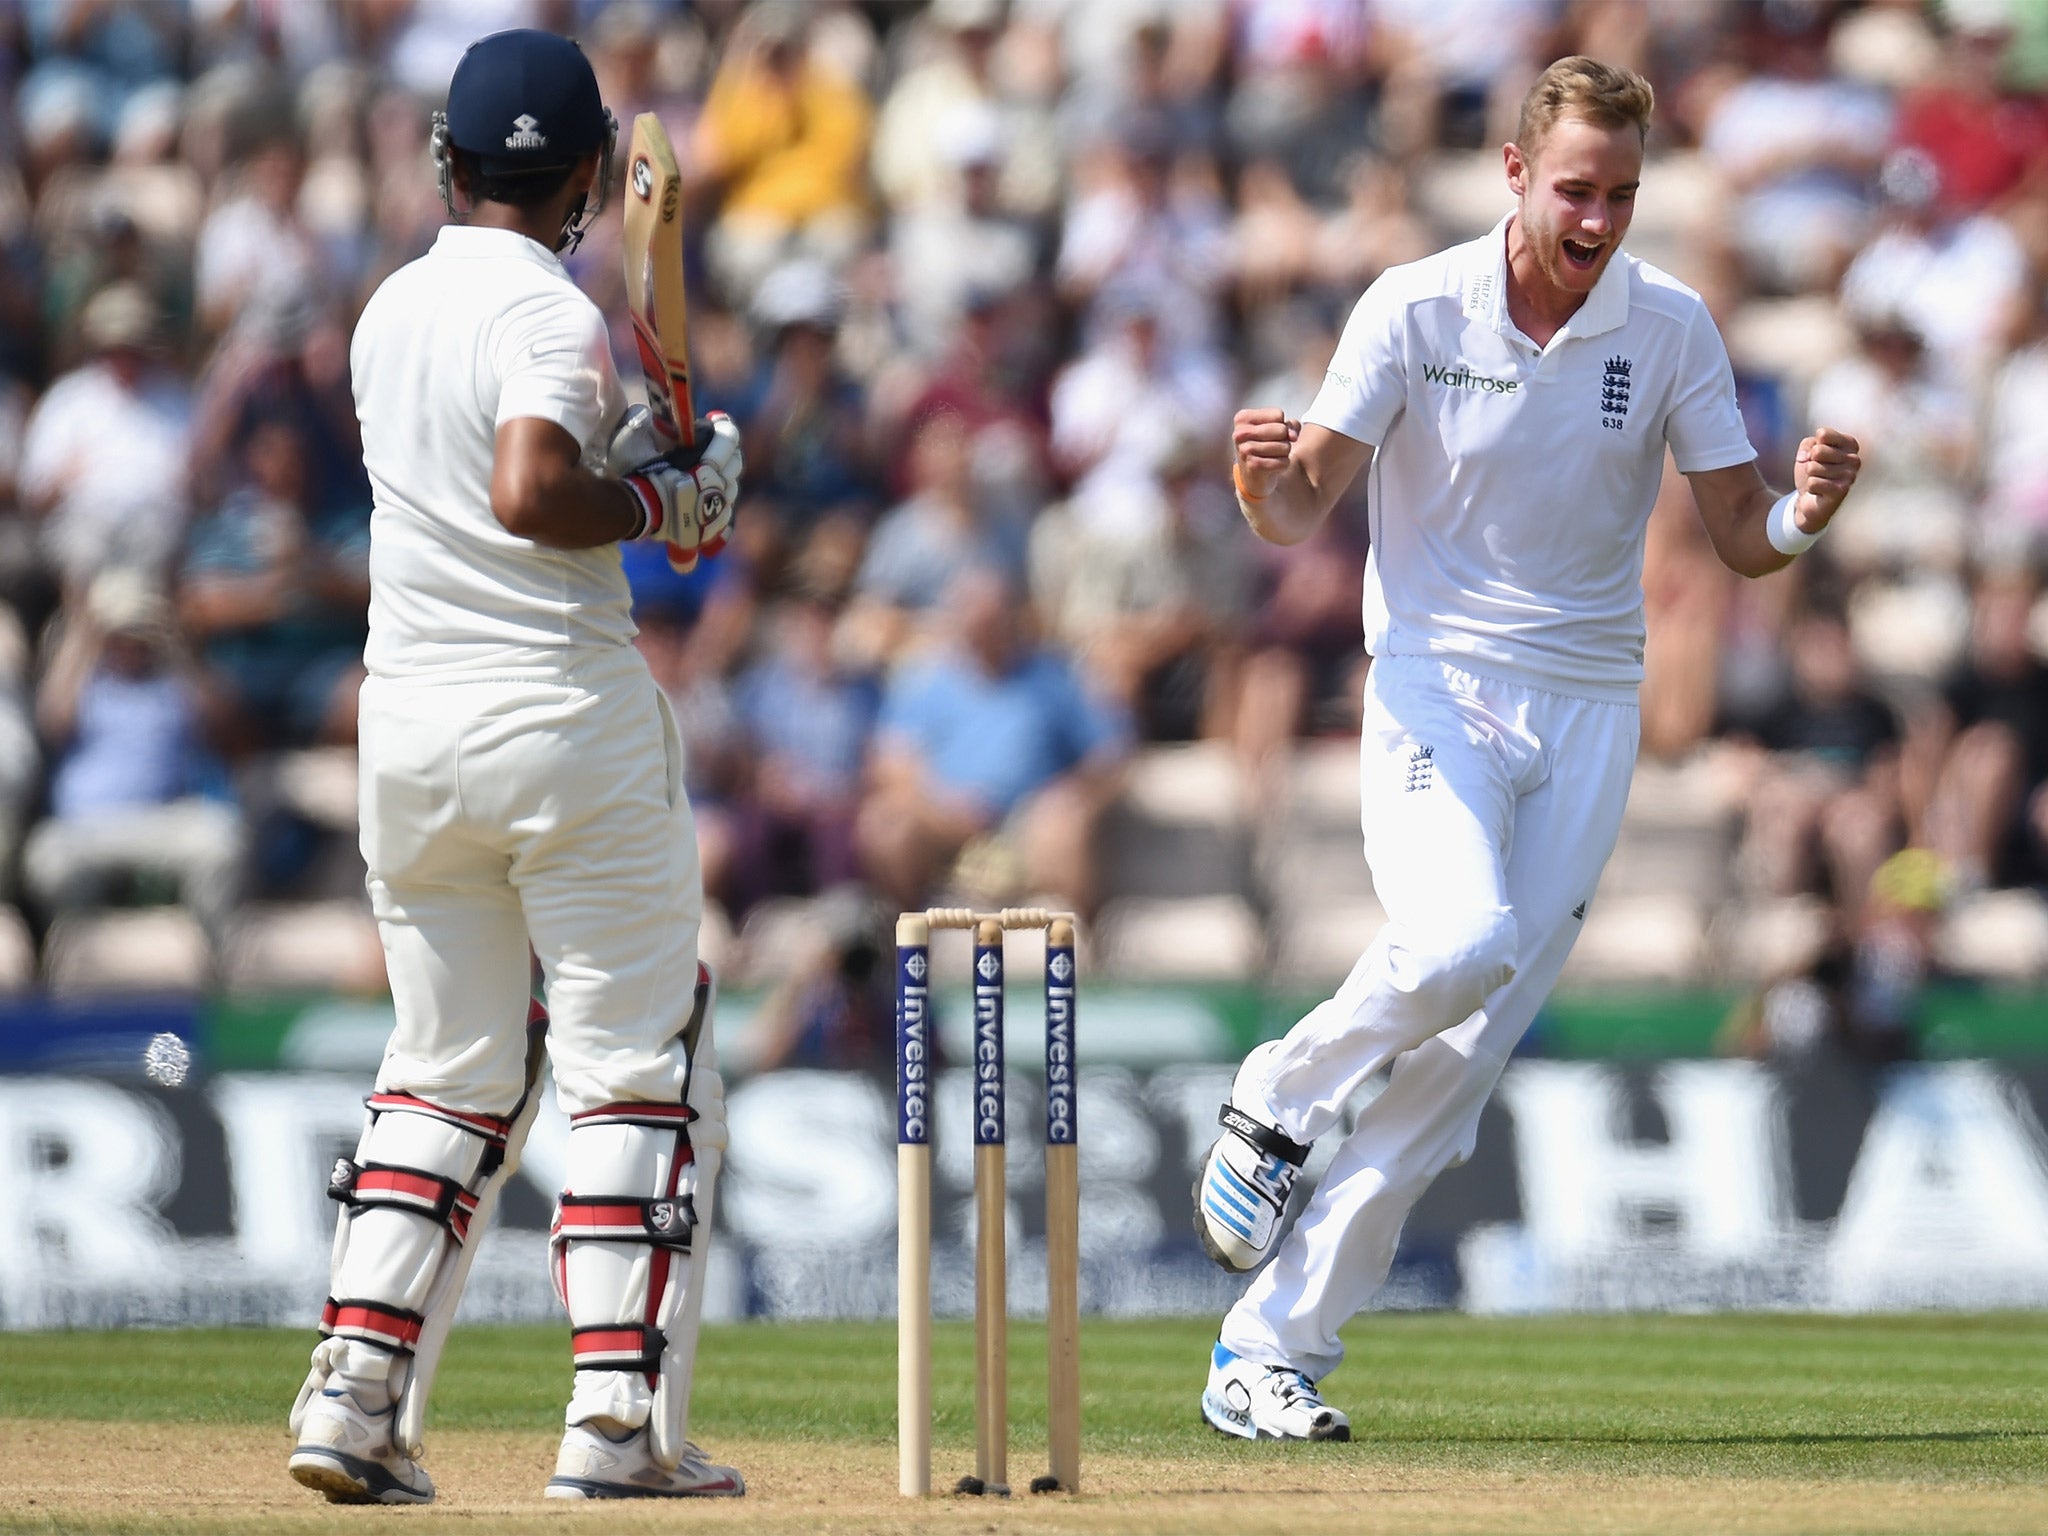 Stuart Broad celebrates after having India batsman Cheteshwar Pujara caught by Jos Buttler to claim his 250th test wicket